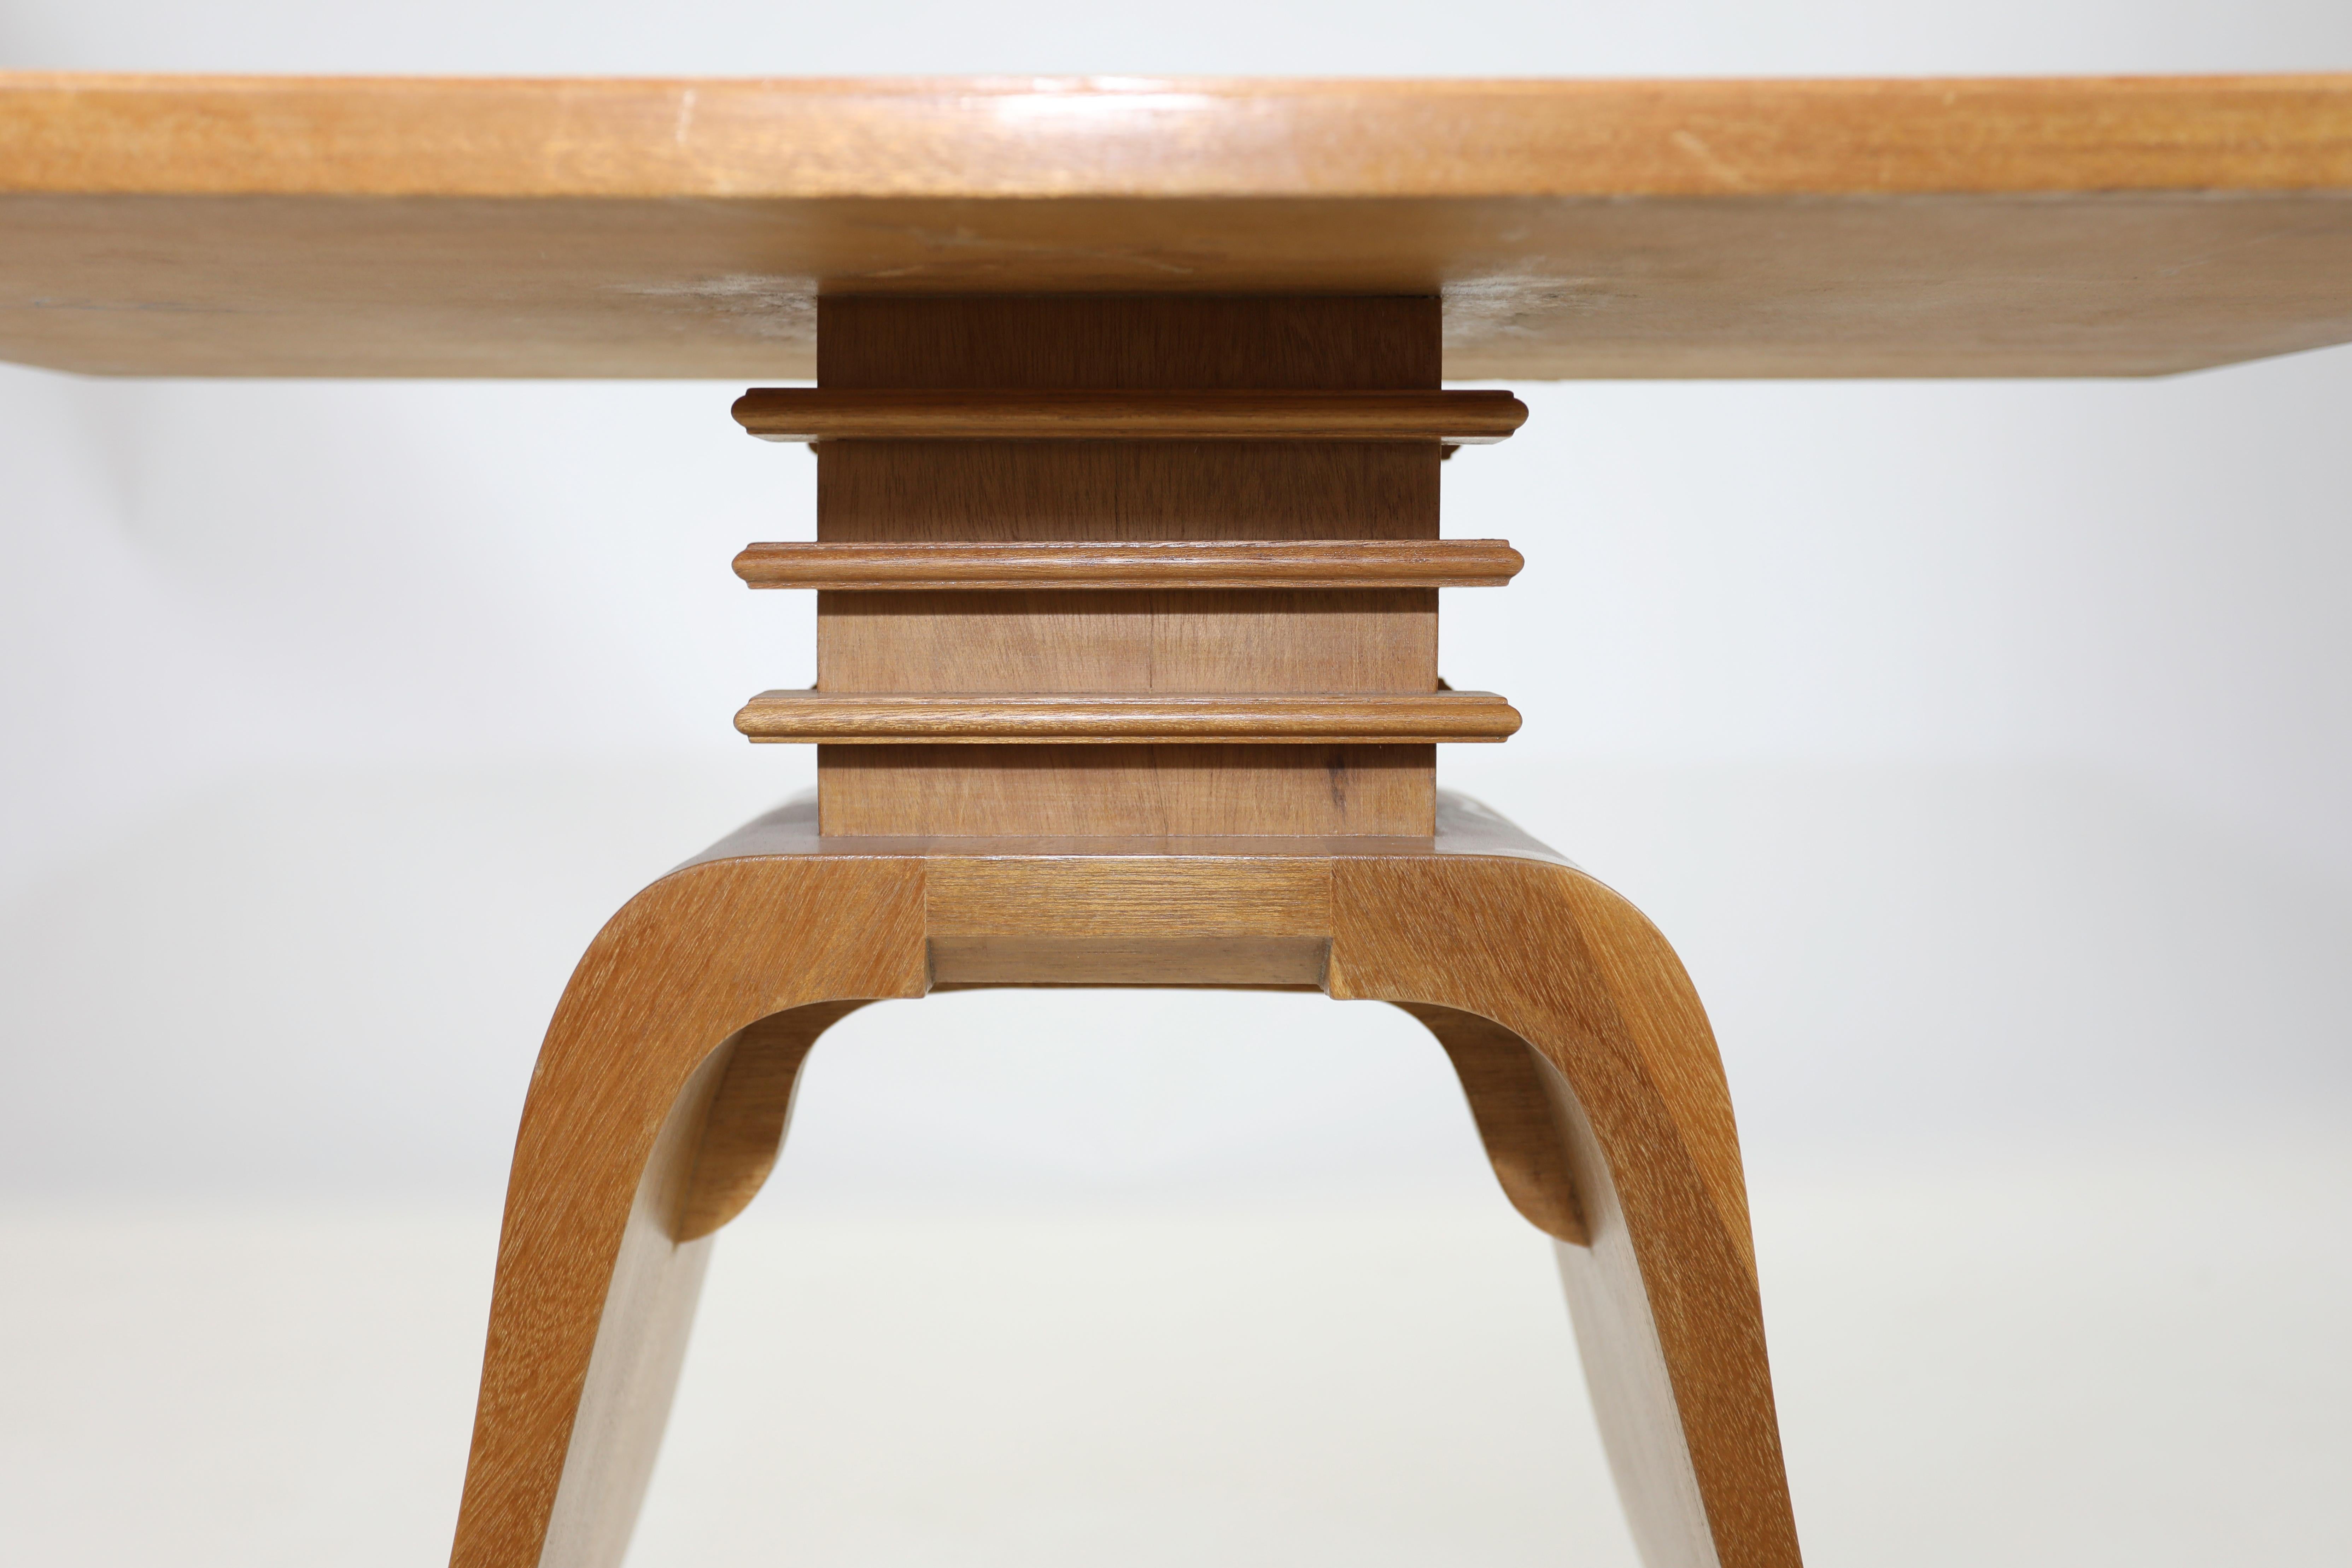 North American Paul Frankl Tables Manufactured by Brown-Saltman